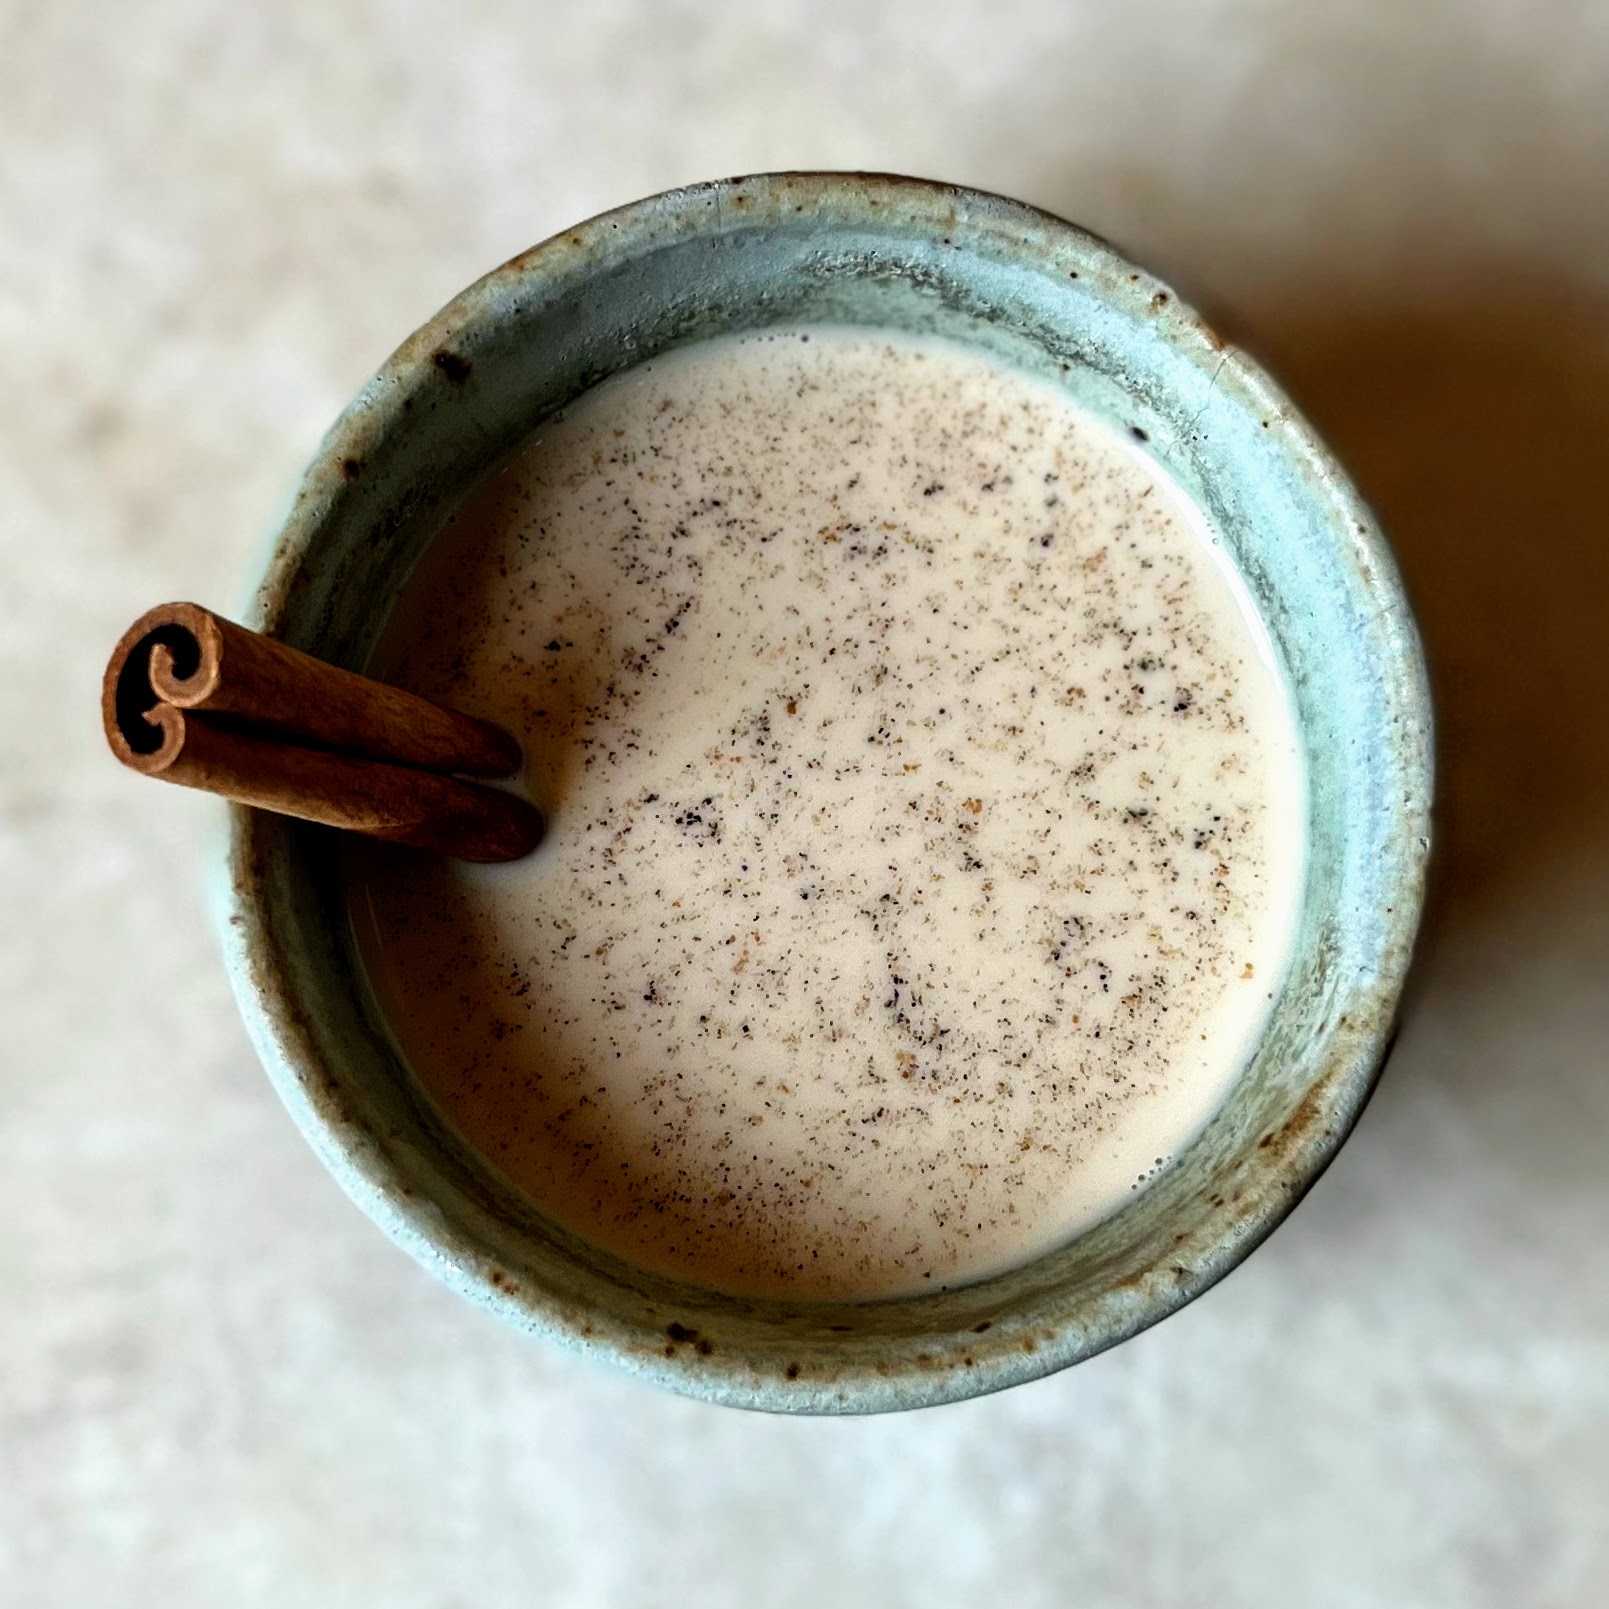 A cup of chai, garnished with a cinnamon stick.